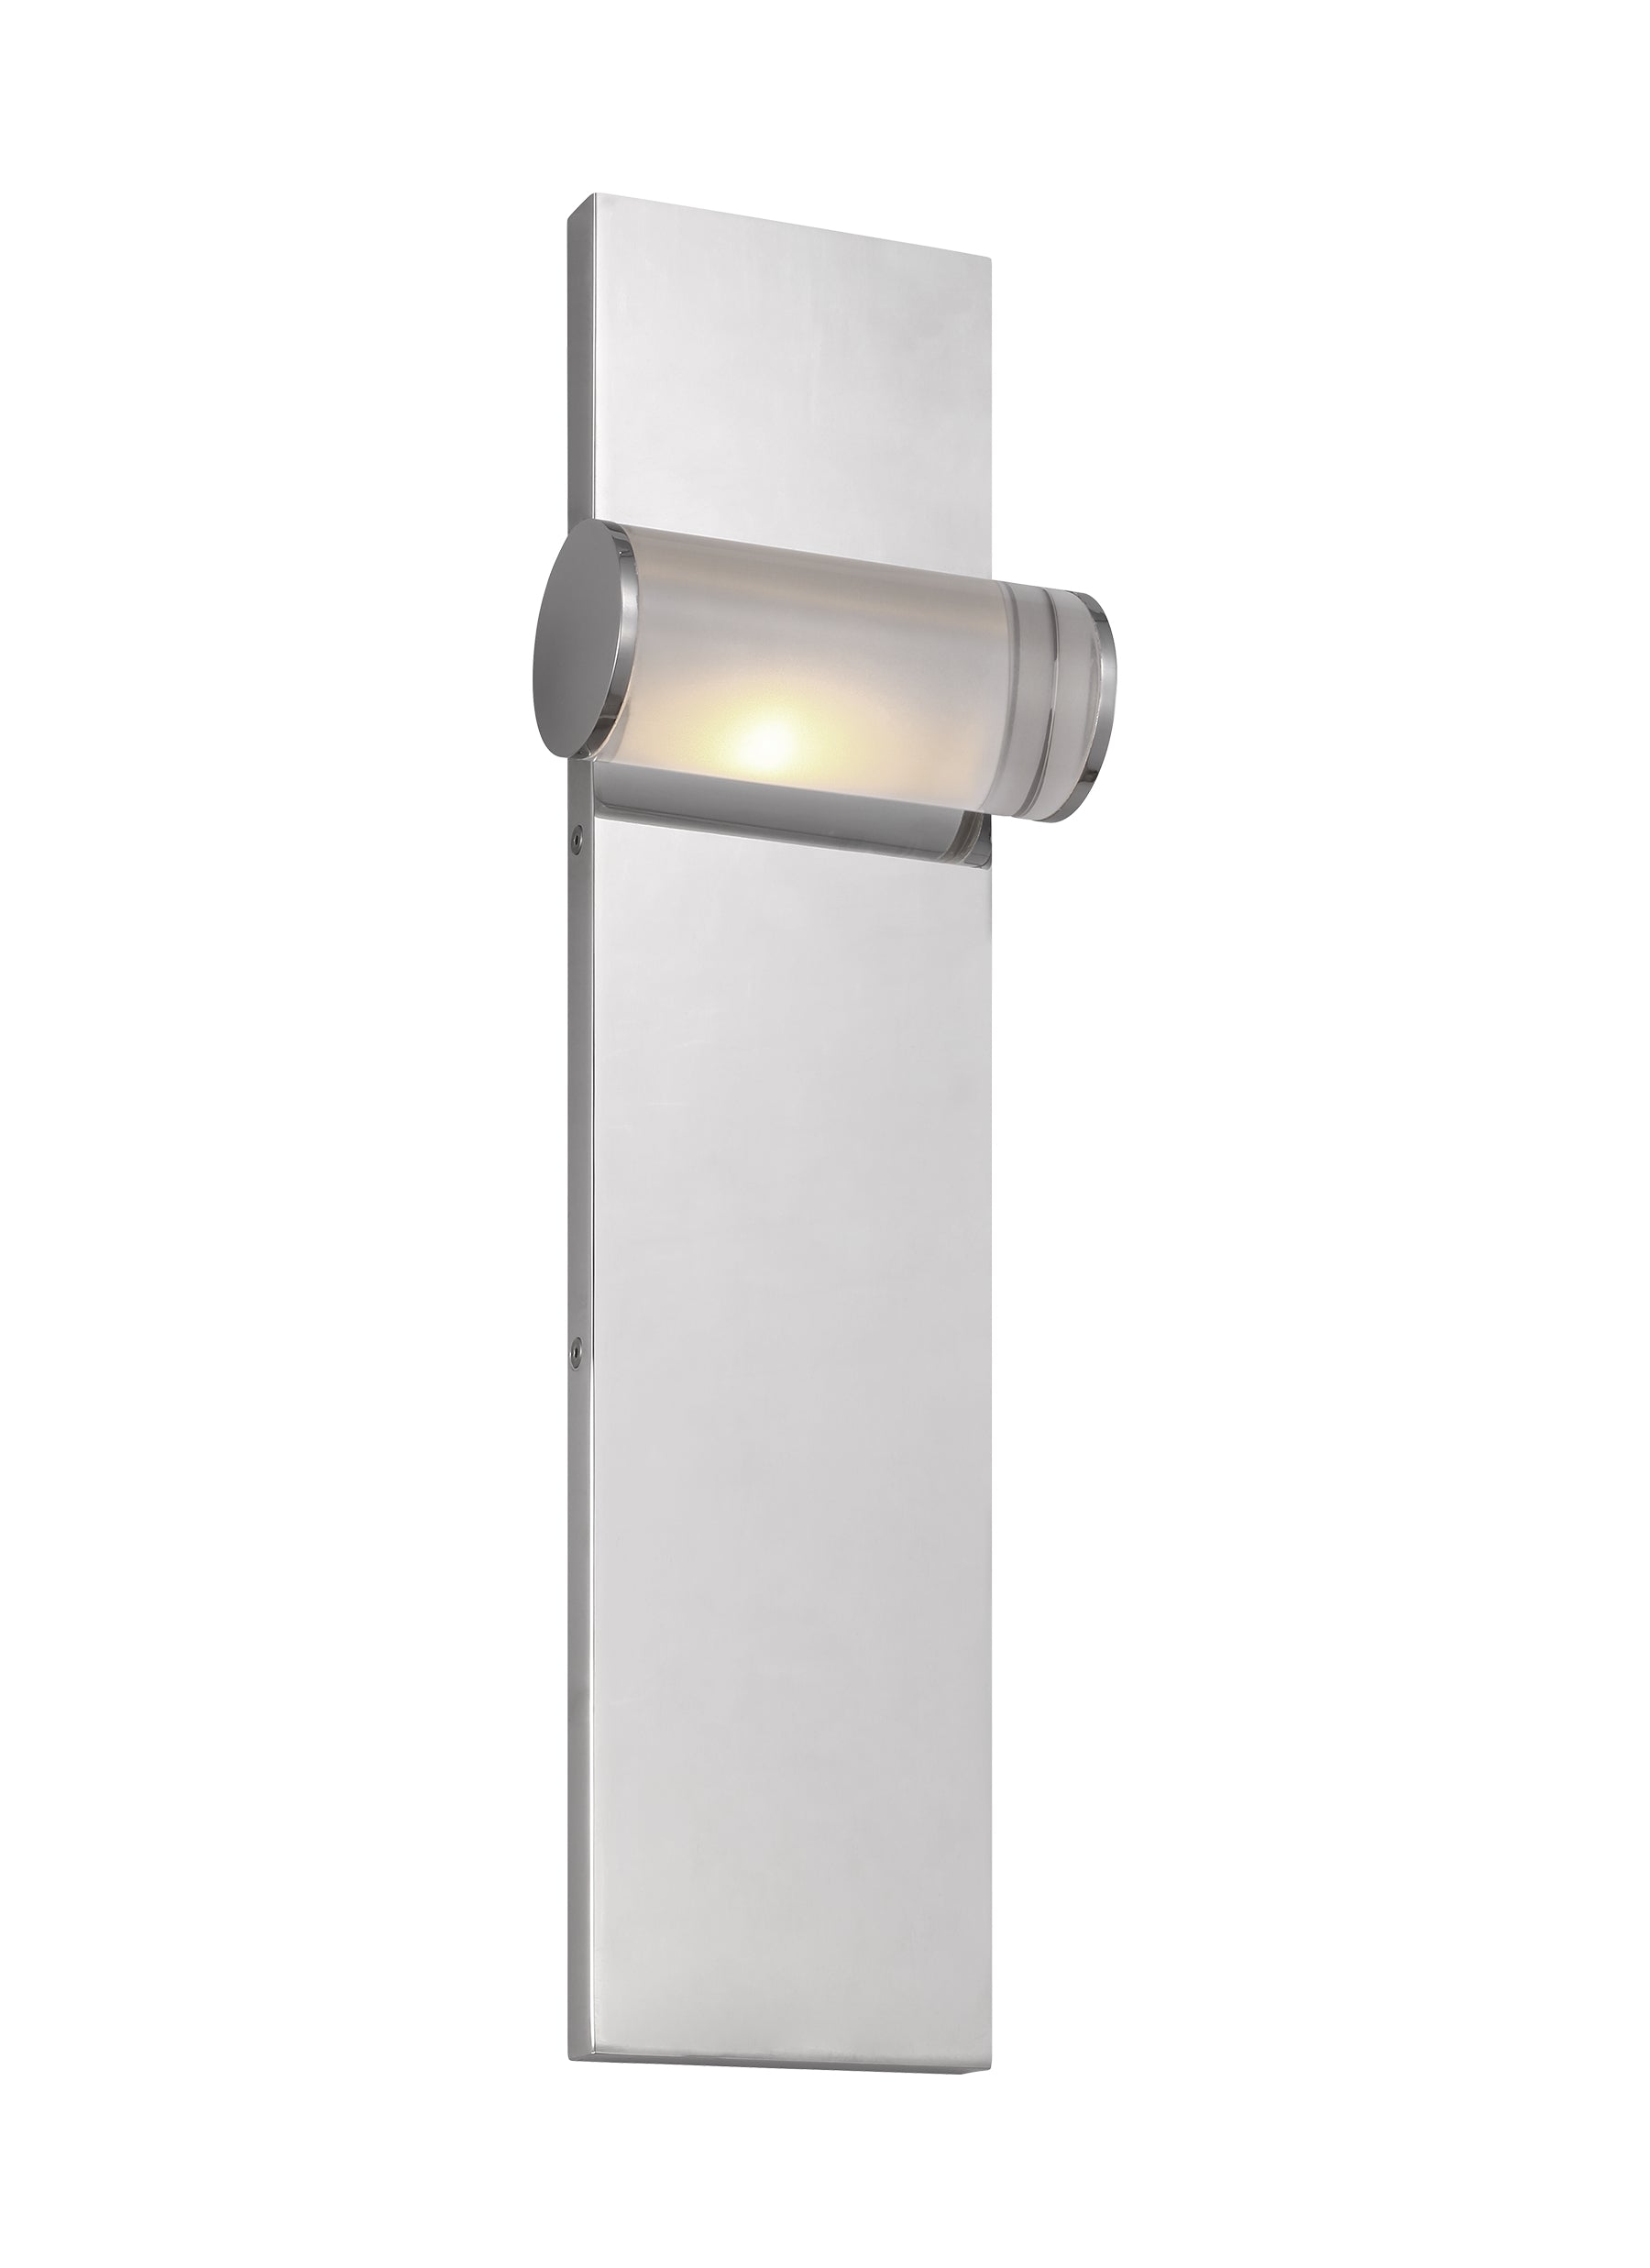 Esfera Wall Sconce | Wall sconces for restaurants